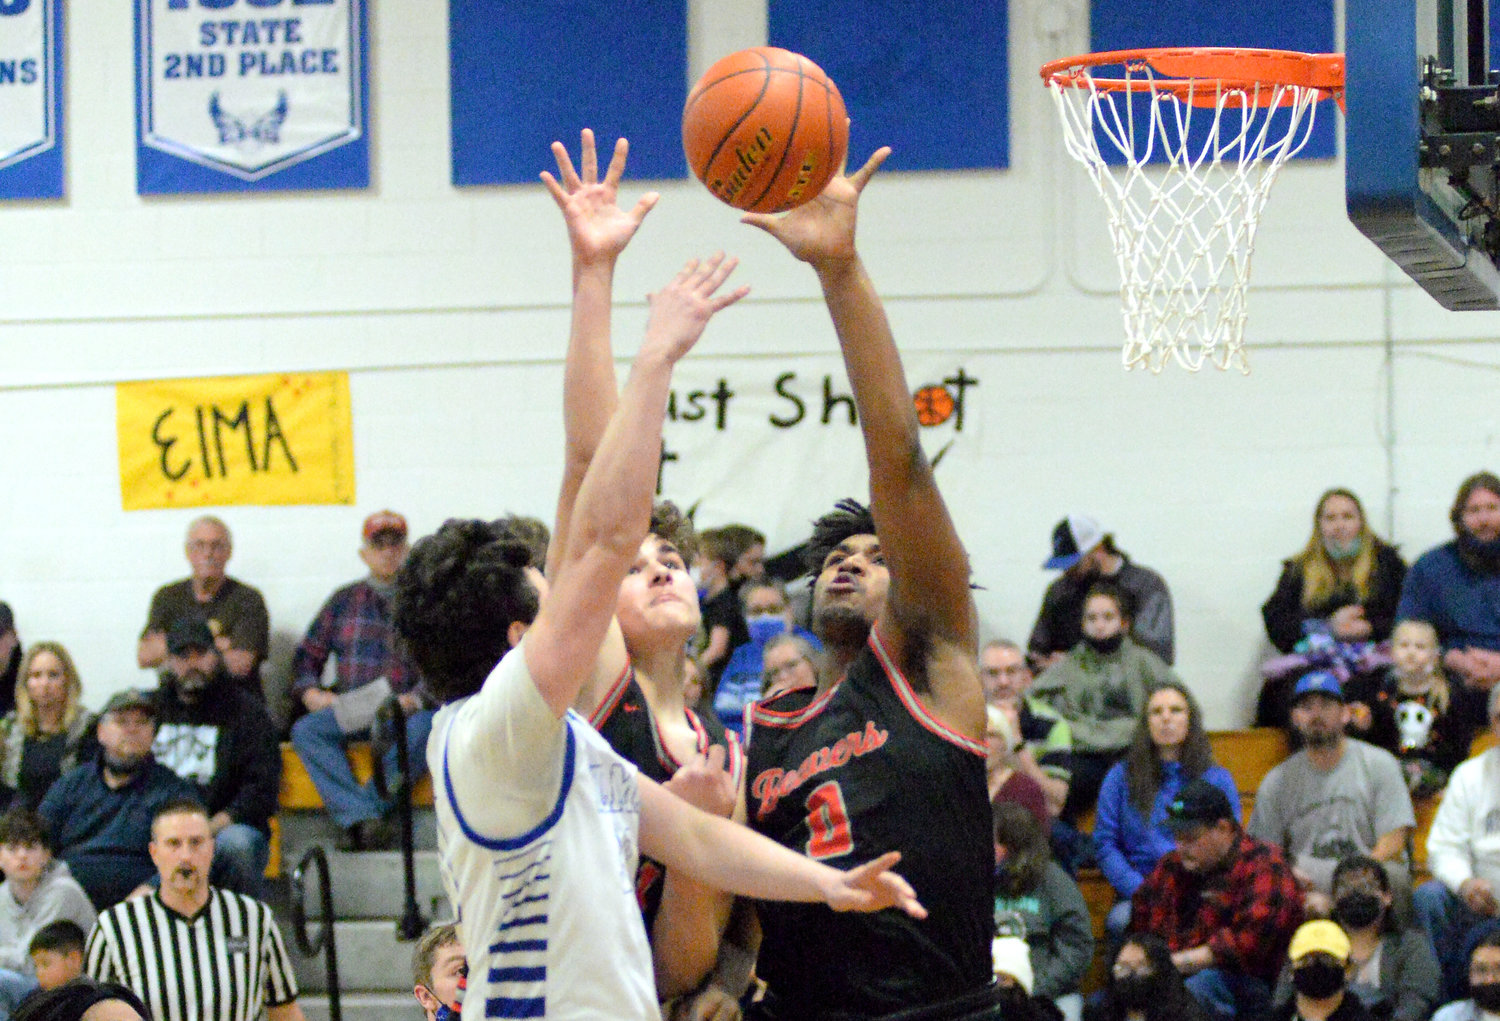 Tenino’s Takari Hickle blocks a shot by an Elma player during a league road game on Tuesday.